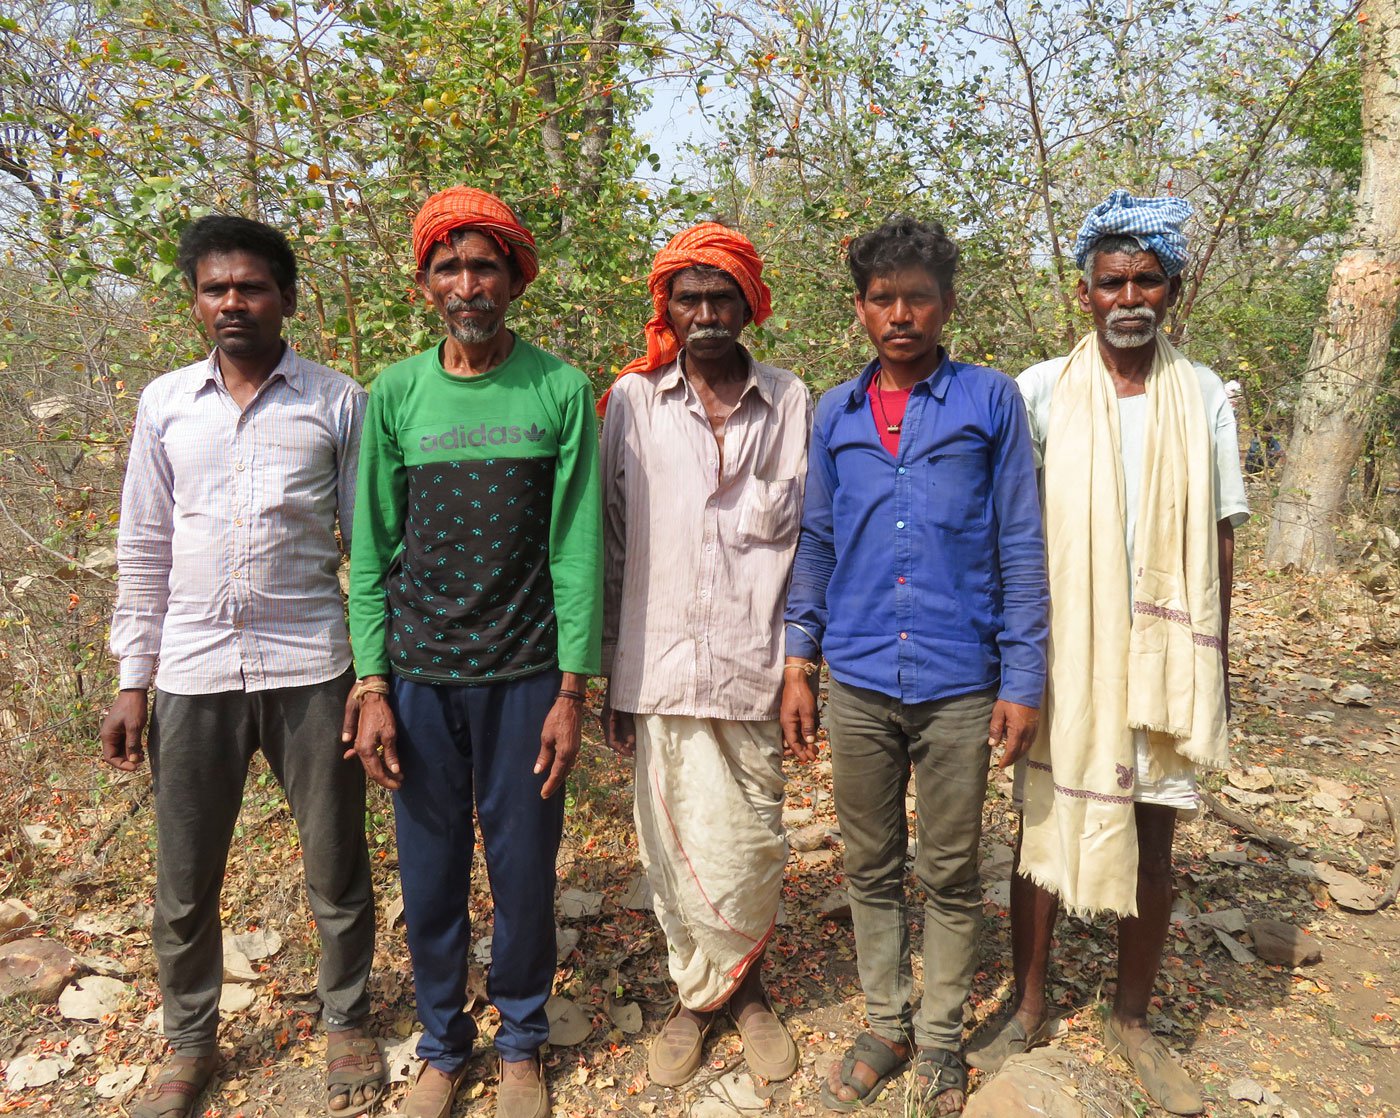 Residents of Bagcha (from left): Mahesh Adivasi, Ram Charan Adivasi, Bachu Adivasi, Hari, and Hareth Adivasi. After relocation to Bamura village, 35 kilometres away, they will lose access to the forests and the produce they depend on